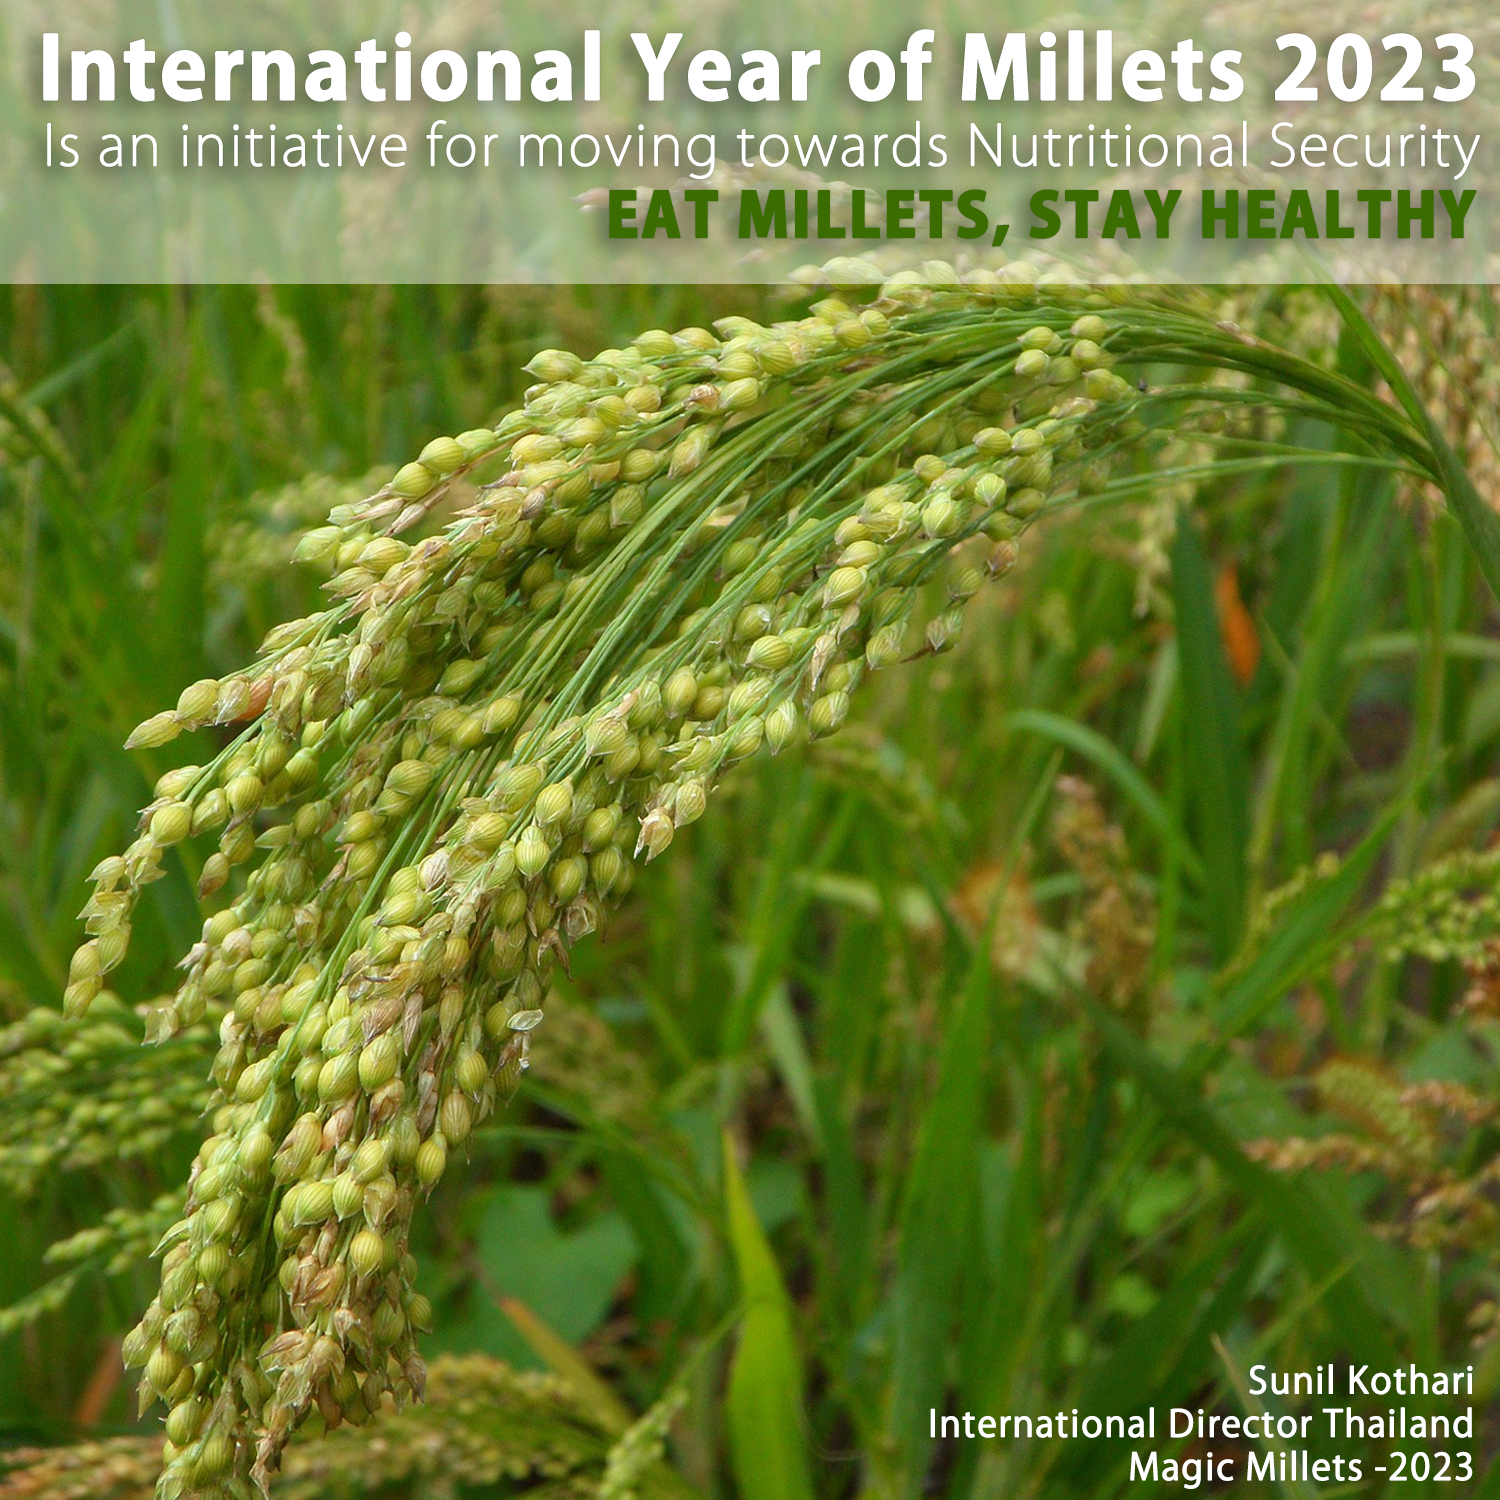 International Year of Millets 2023 is an initiative for moving towards Nutritional Security